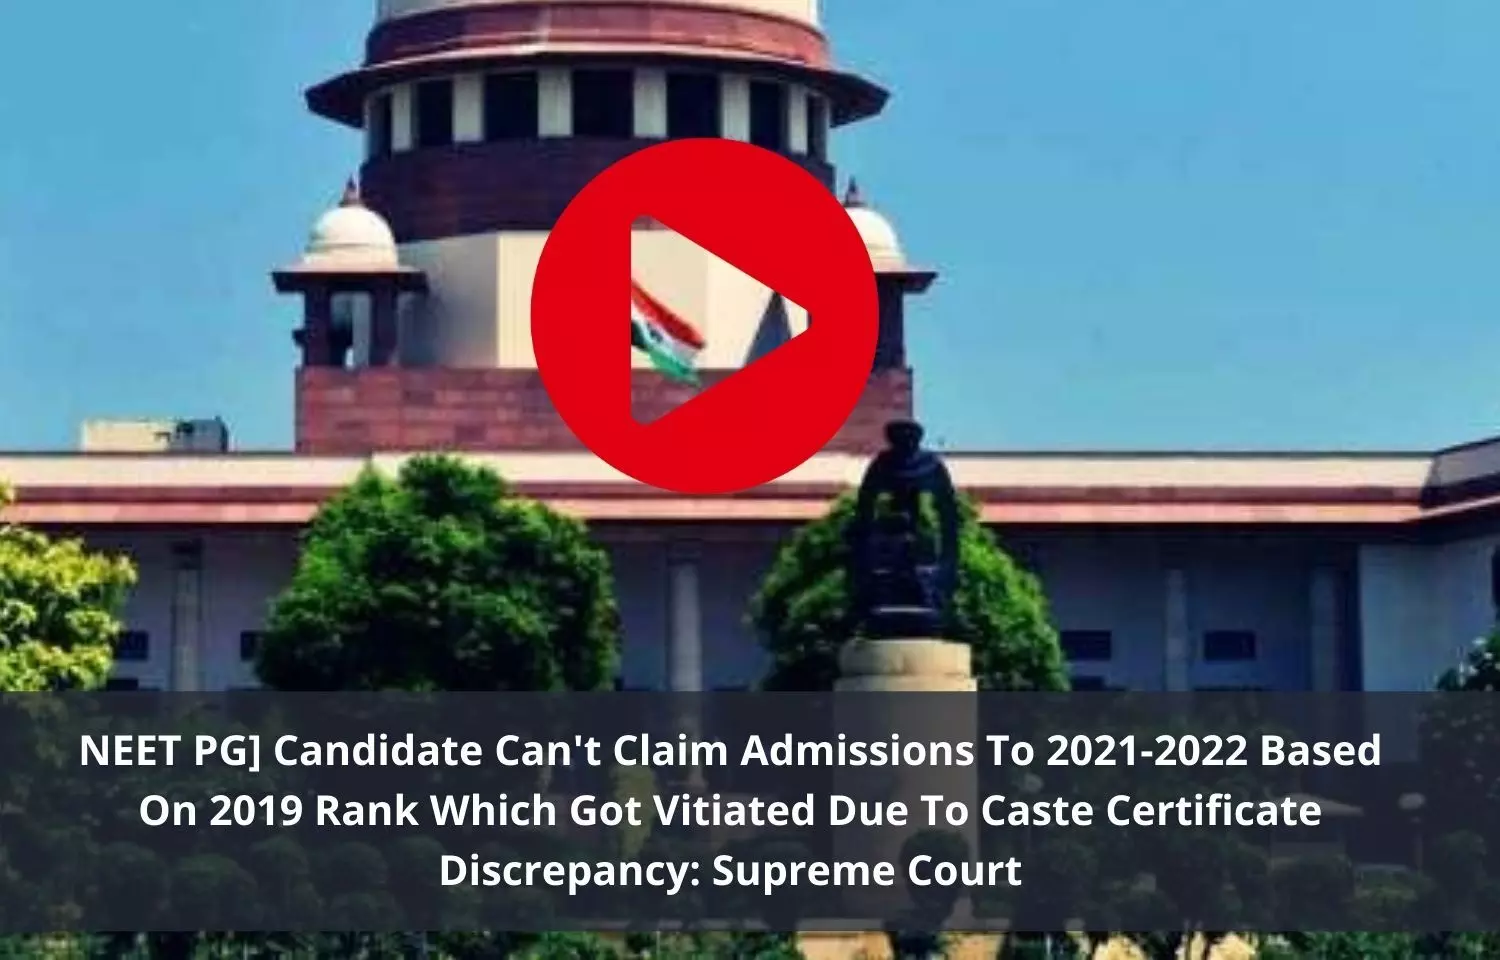 NEET PG candidate cant claim admissions to 2021-2022 based on 2019 rank